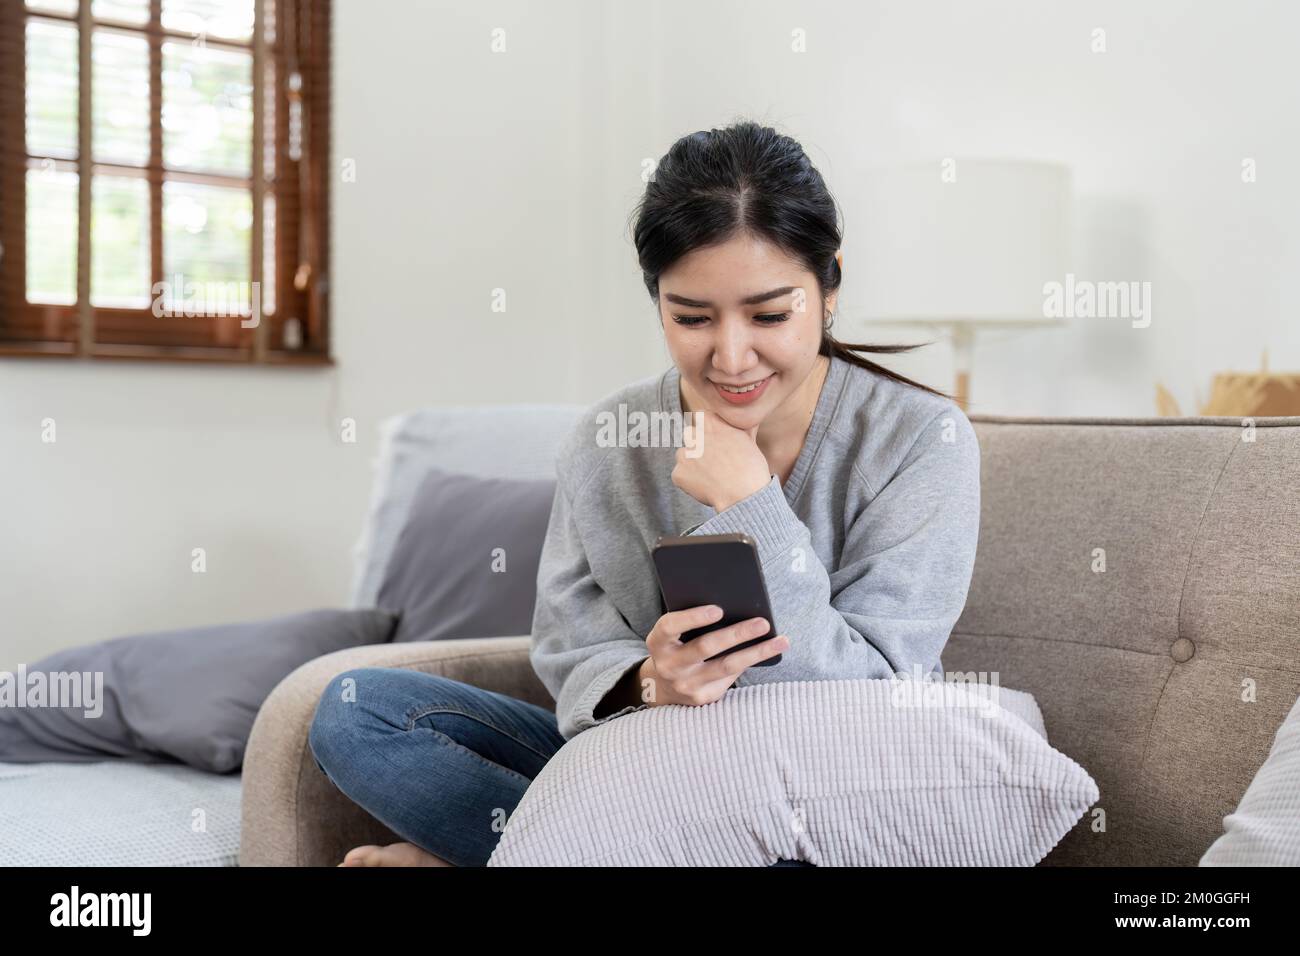 Image of smiling nice asian woman using cellphone while sitting on sofa Stock Photo